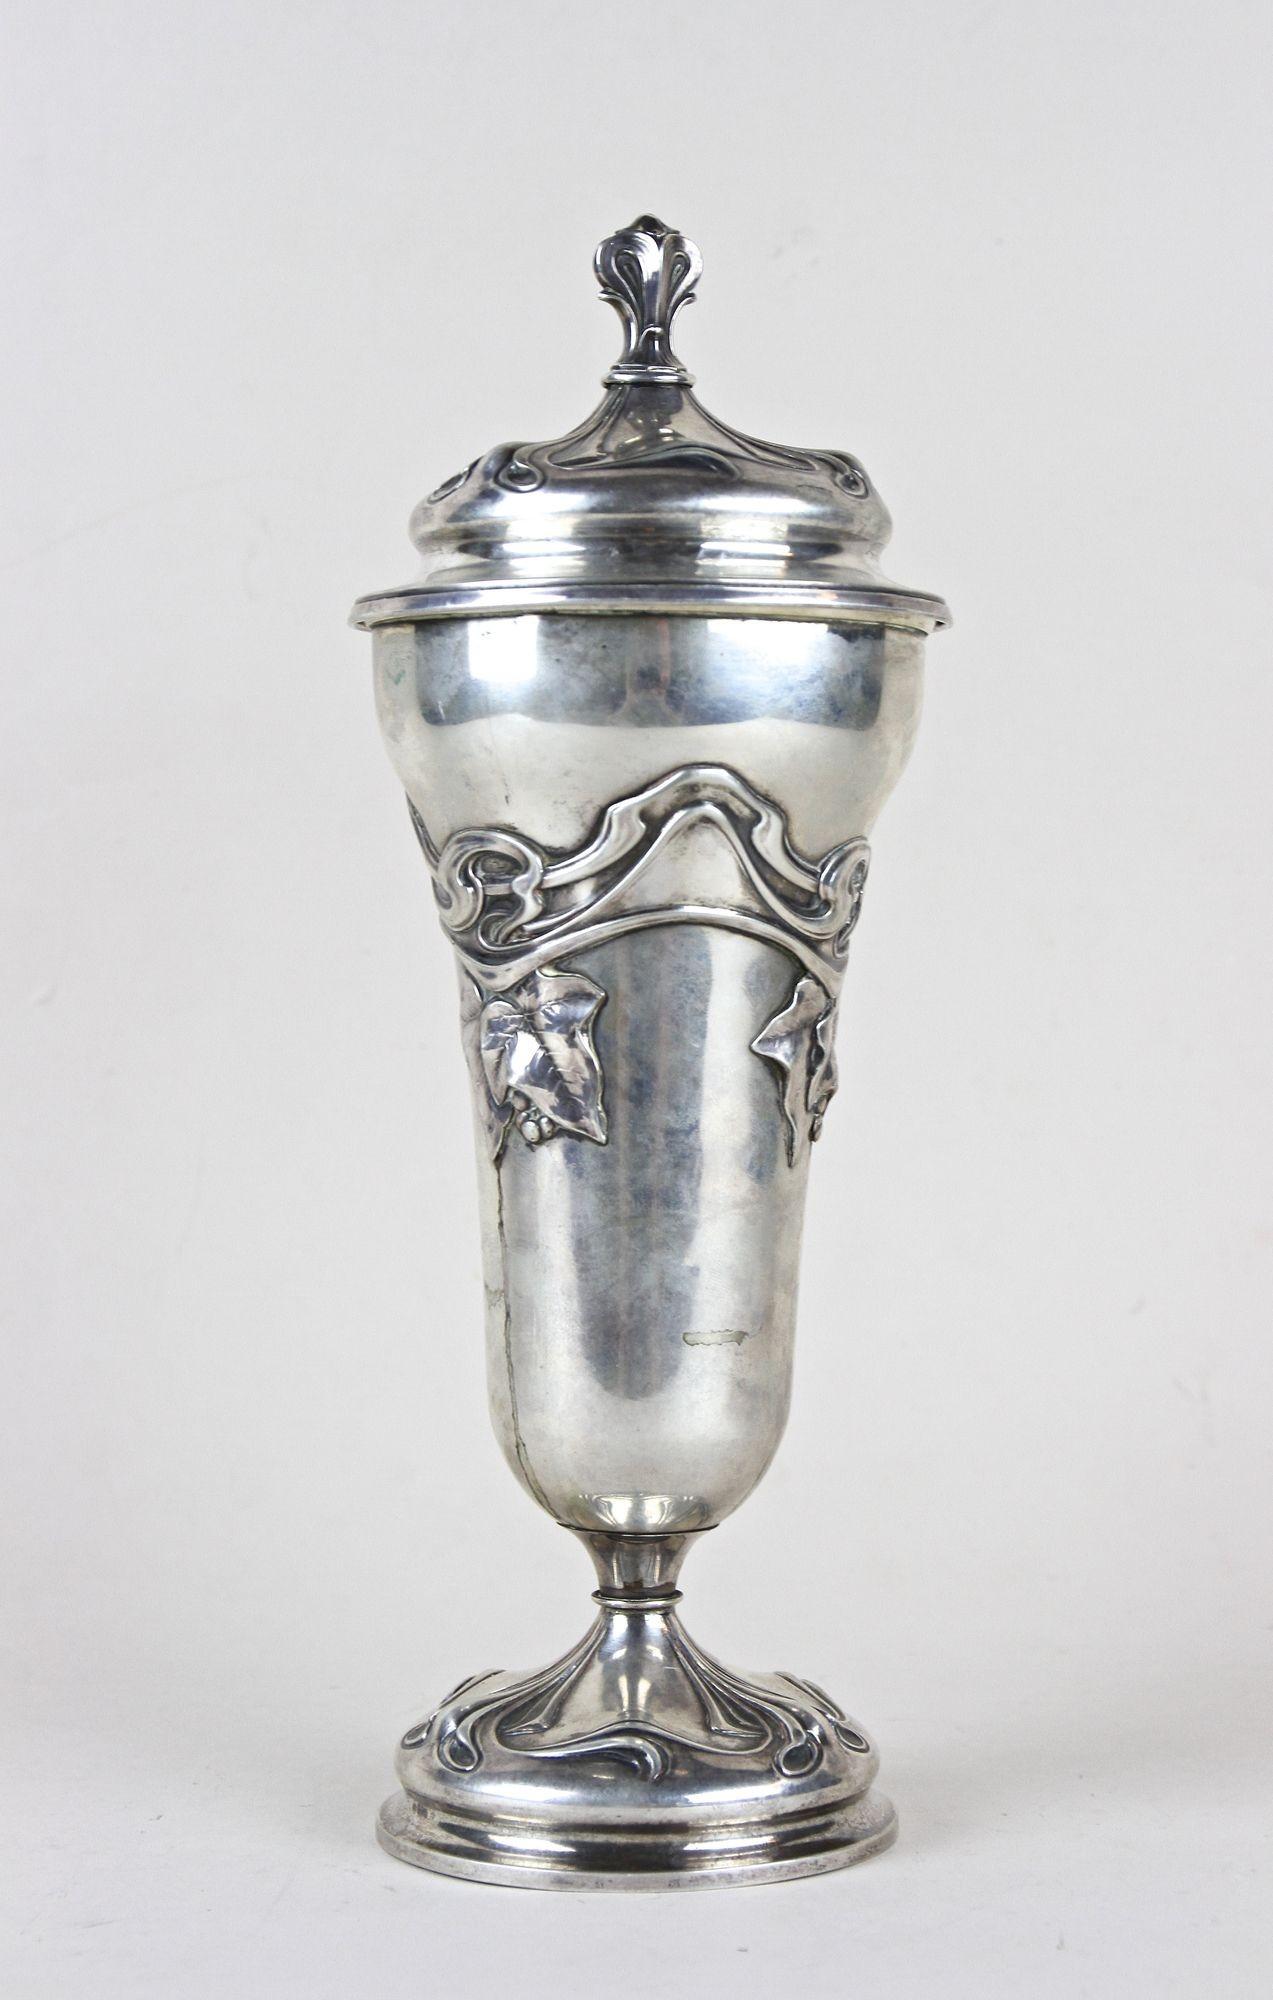 Delightful solid silver amphora vase with lid from the early Art Nouveau period in Austria around 1900. Artfully handcrafted of 402 gramm of fine silver, it shows a very elegant design adorned by lovely embossed, typical floral/ organic Art Nouveau